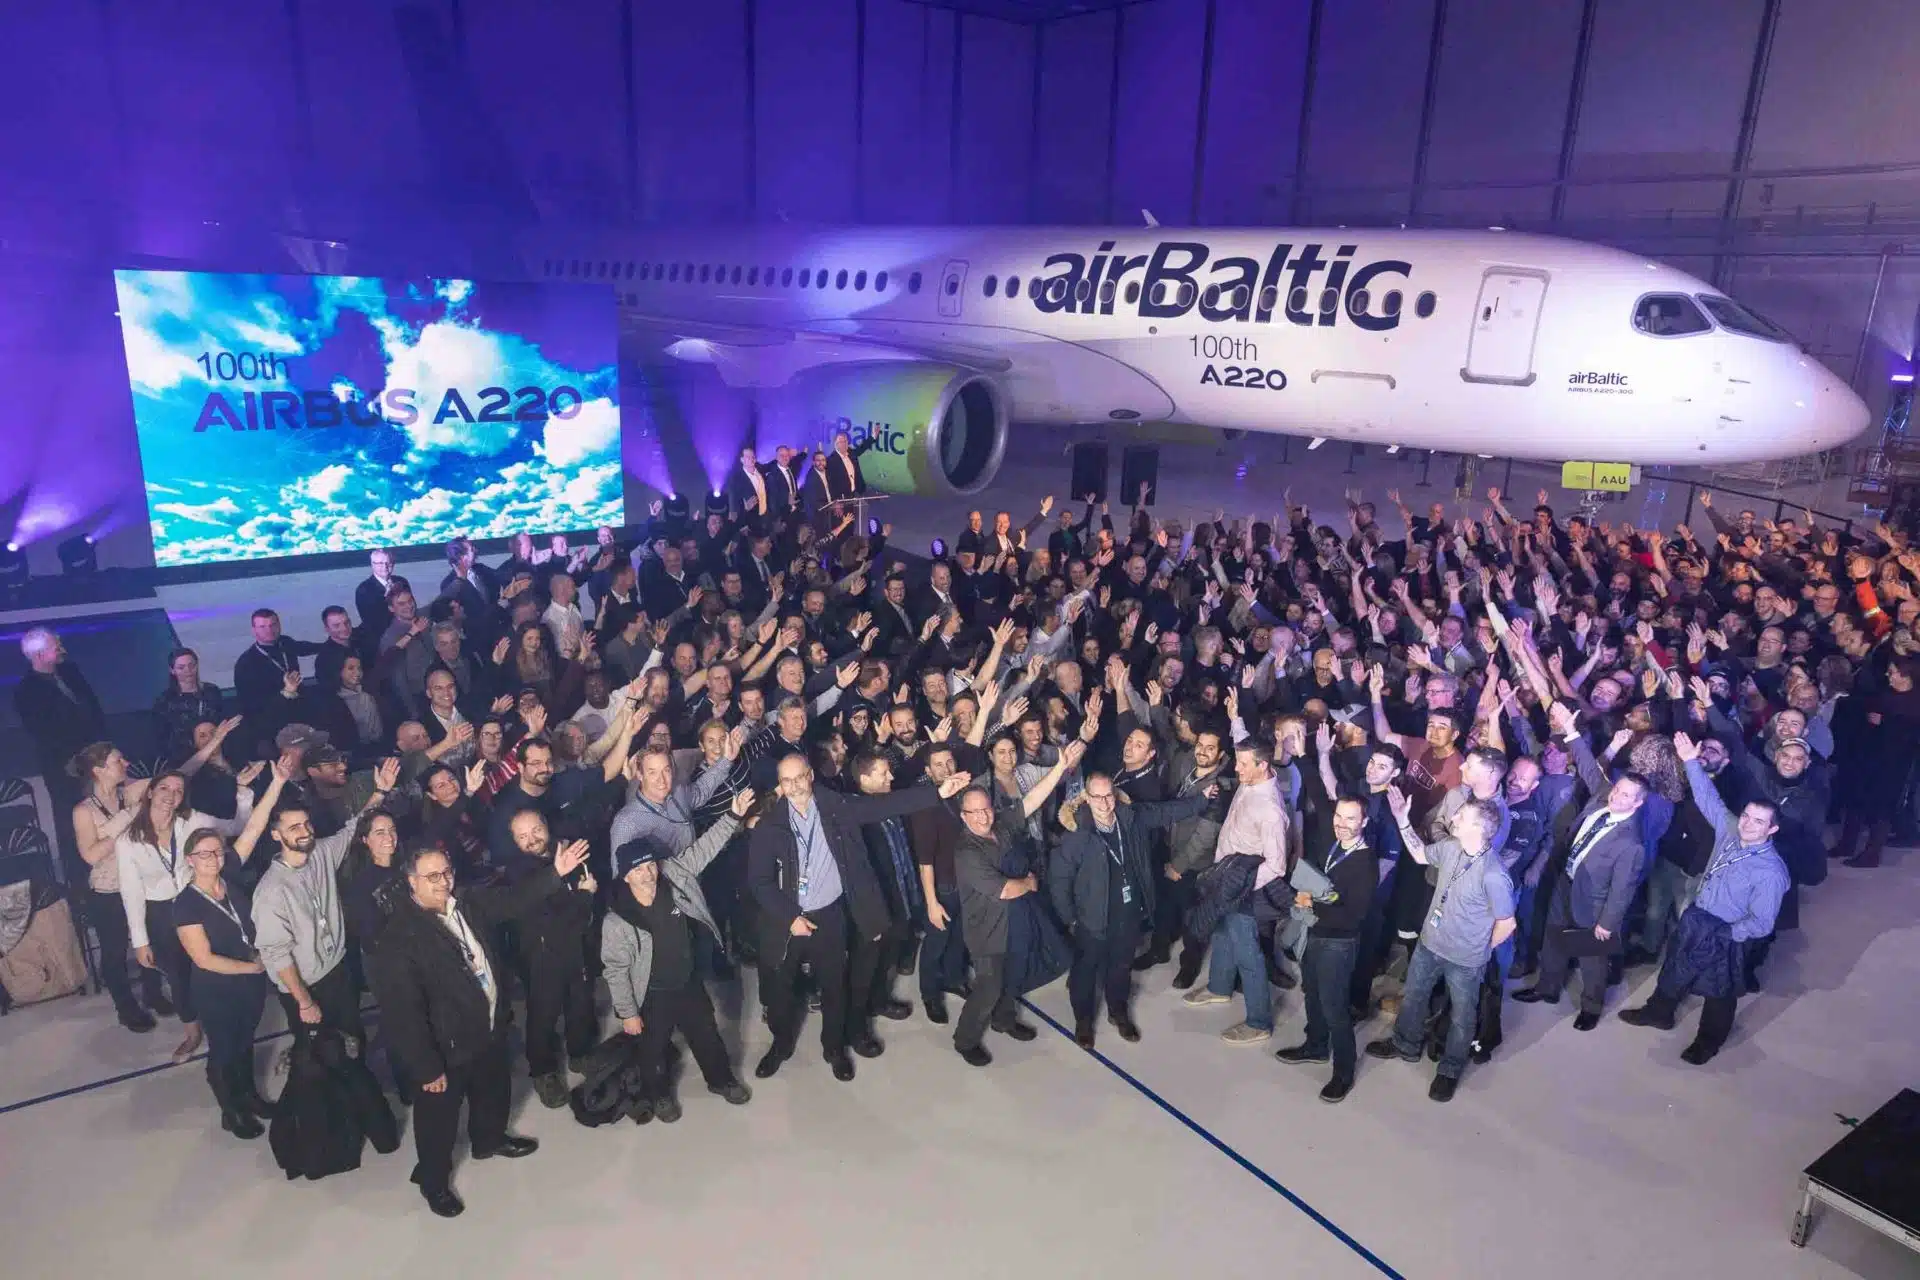 Airbus celebrates the 100th A220 aircraft produced